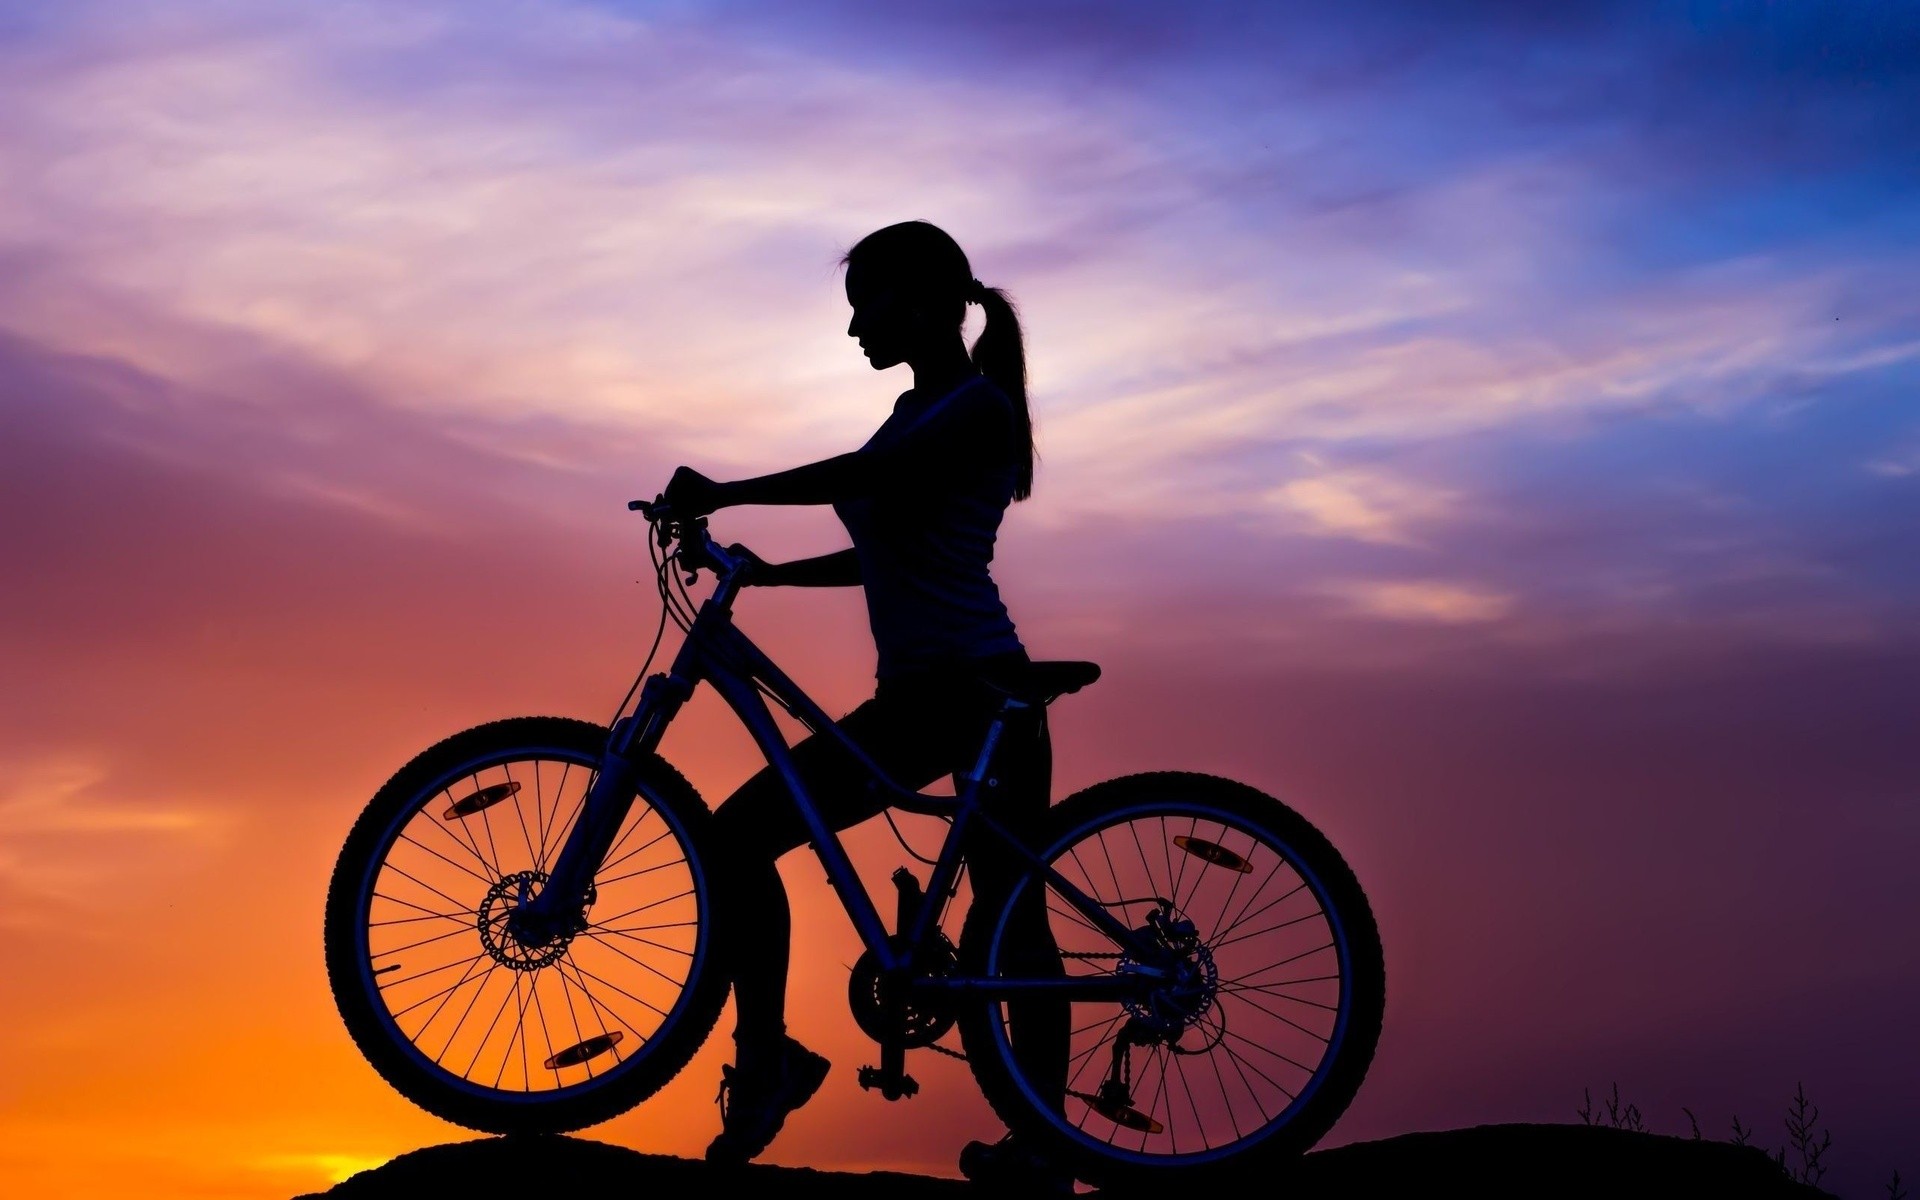 Women Model Brunette Long Hair Women Outdoors Nature Bicycle Sporty Clouds Hills Sunset Silhouette C 1920x1200